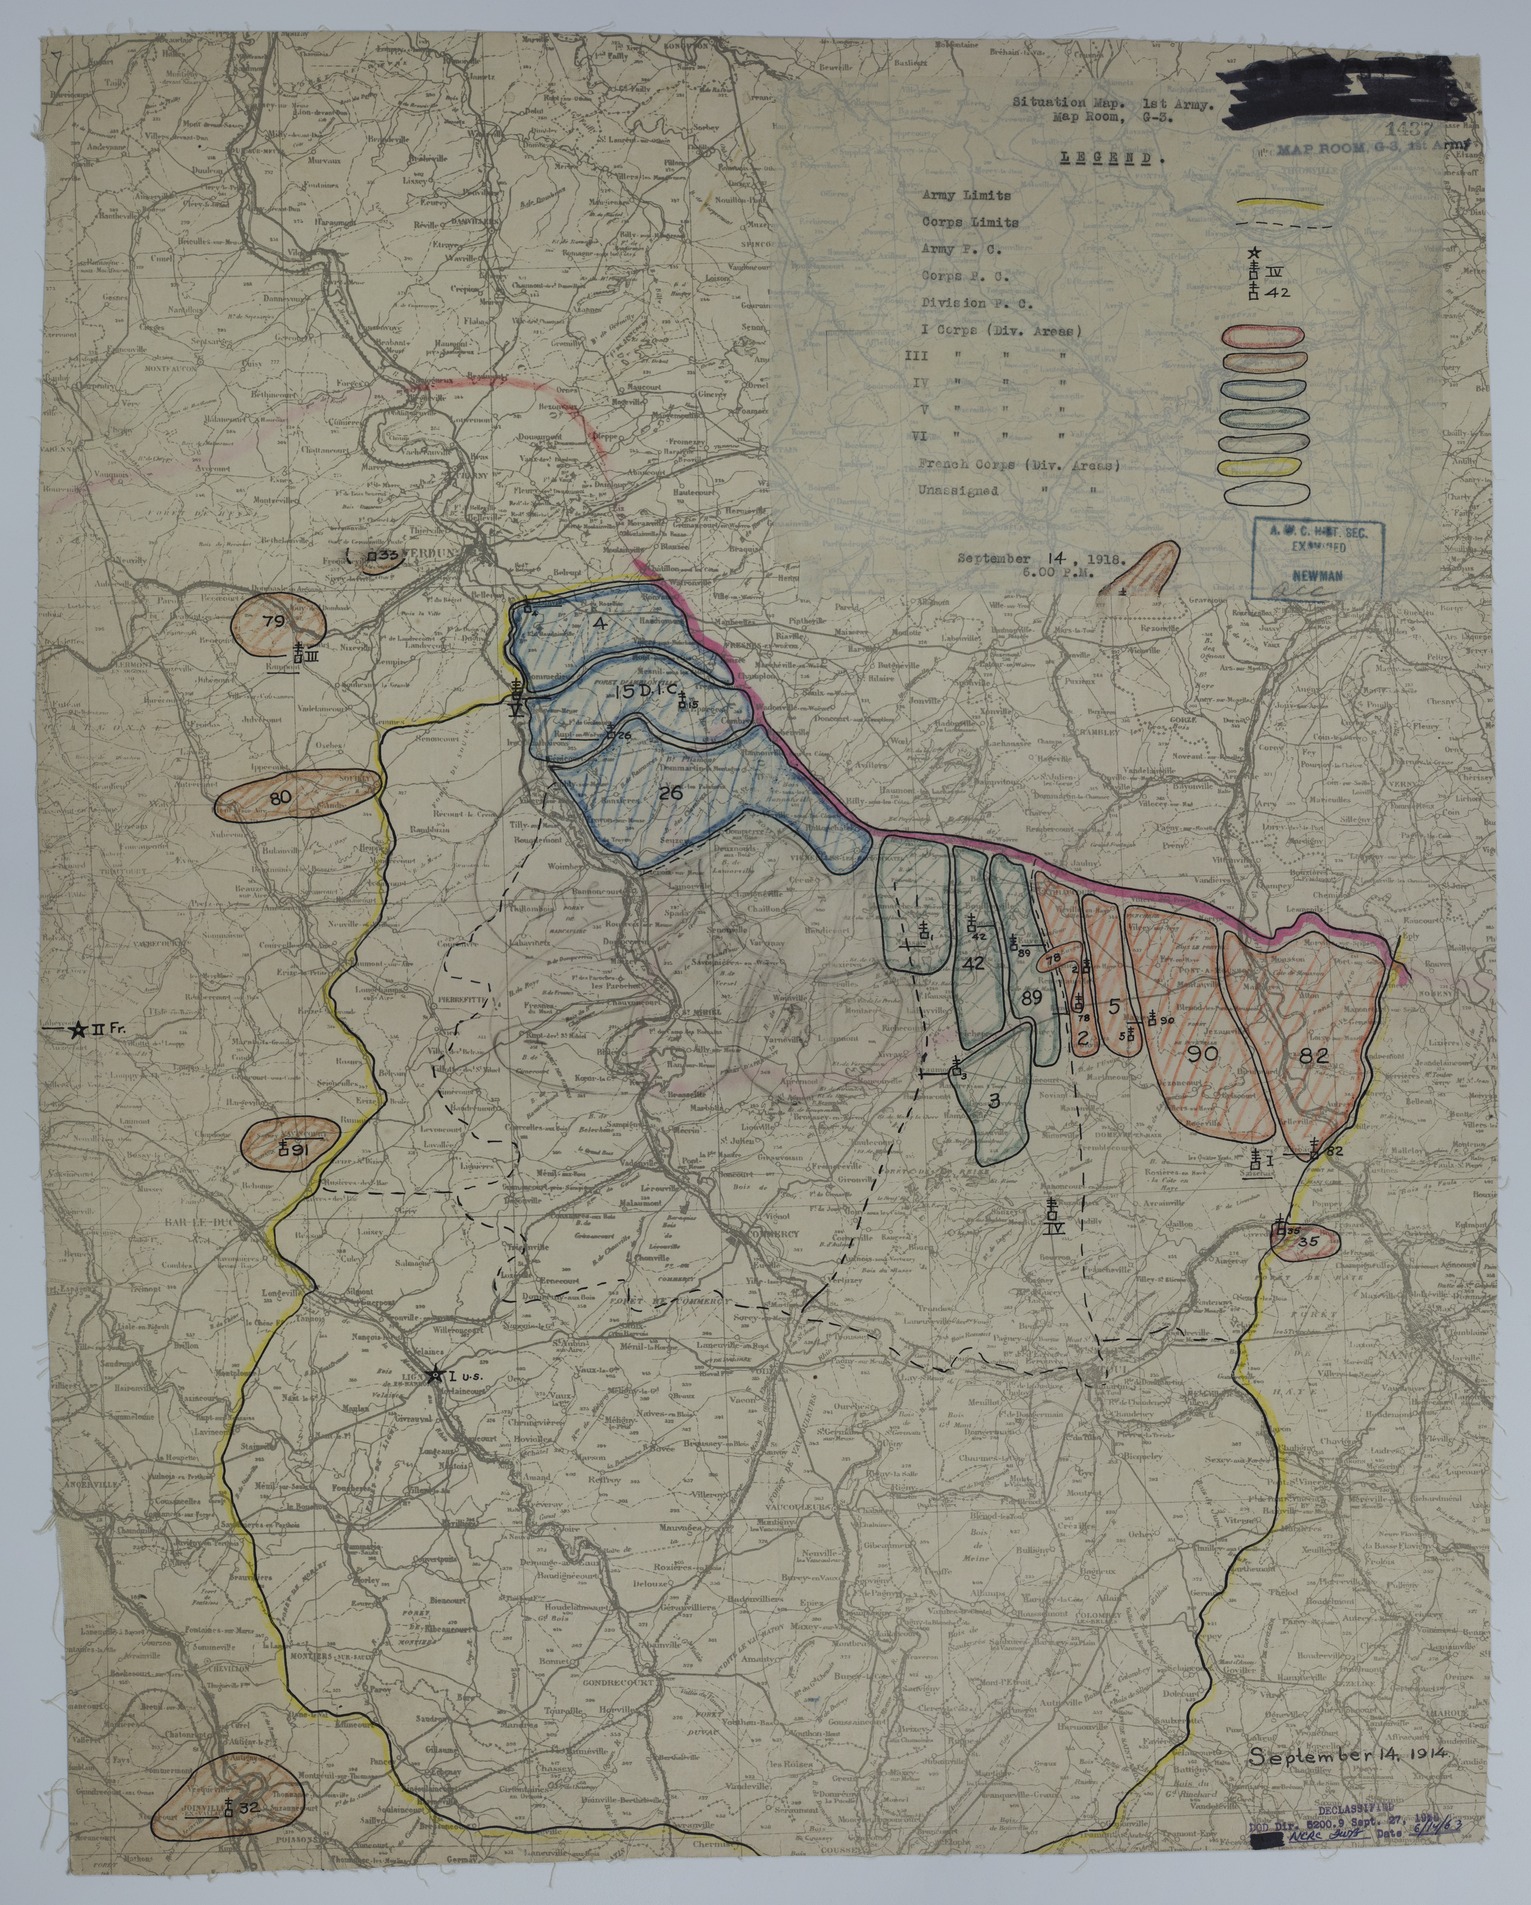 Map of Divisional Positions on September 14, 1918